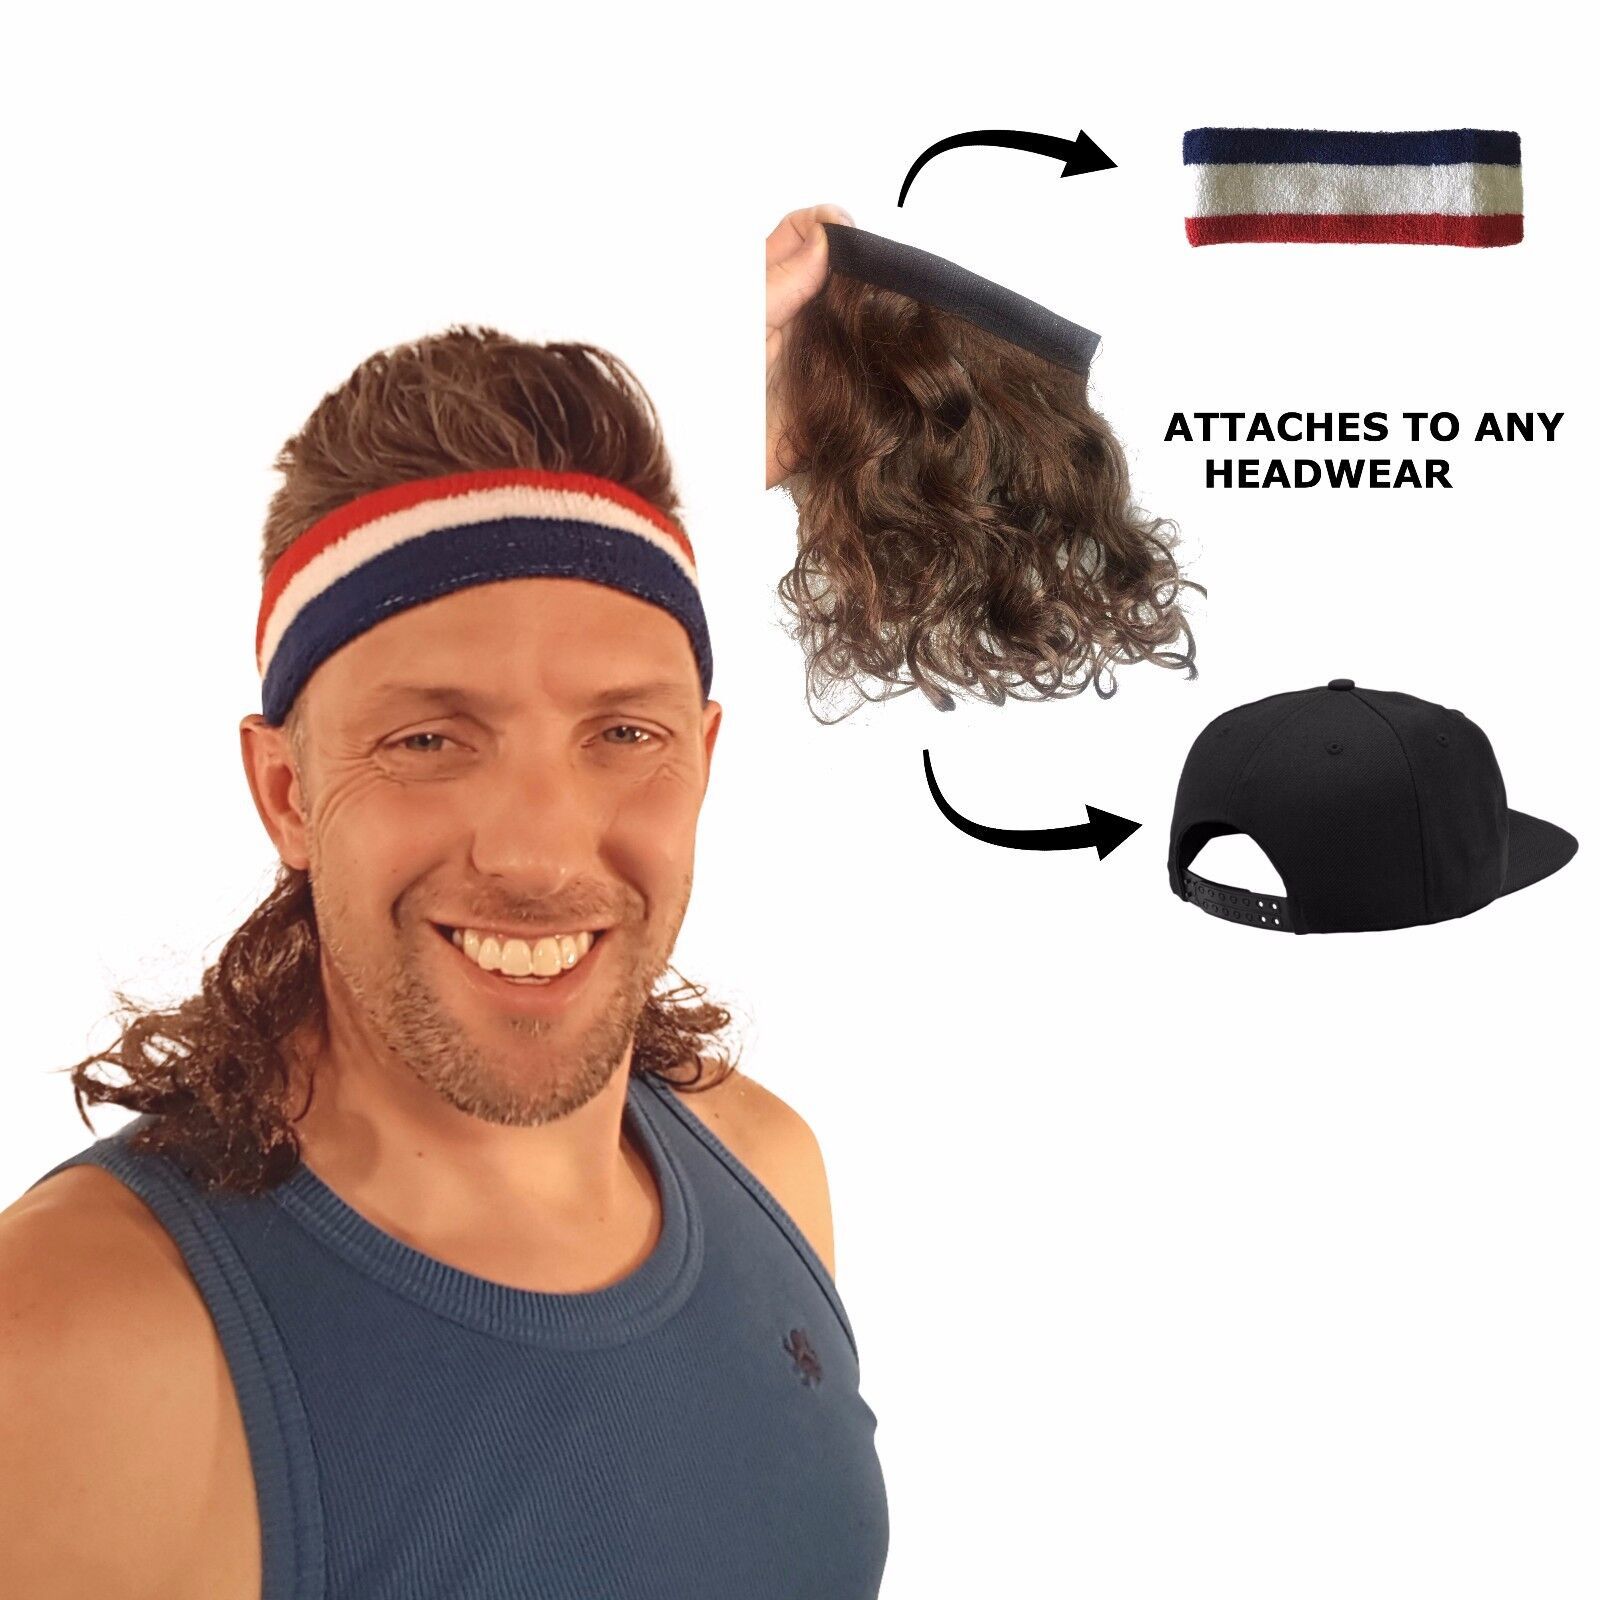 Primary image for Magic Mullet - Wig Attaches to any Headwear - Mullet Headband - Free Head Band